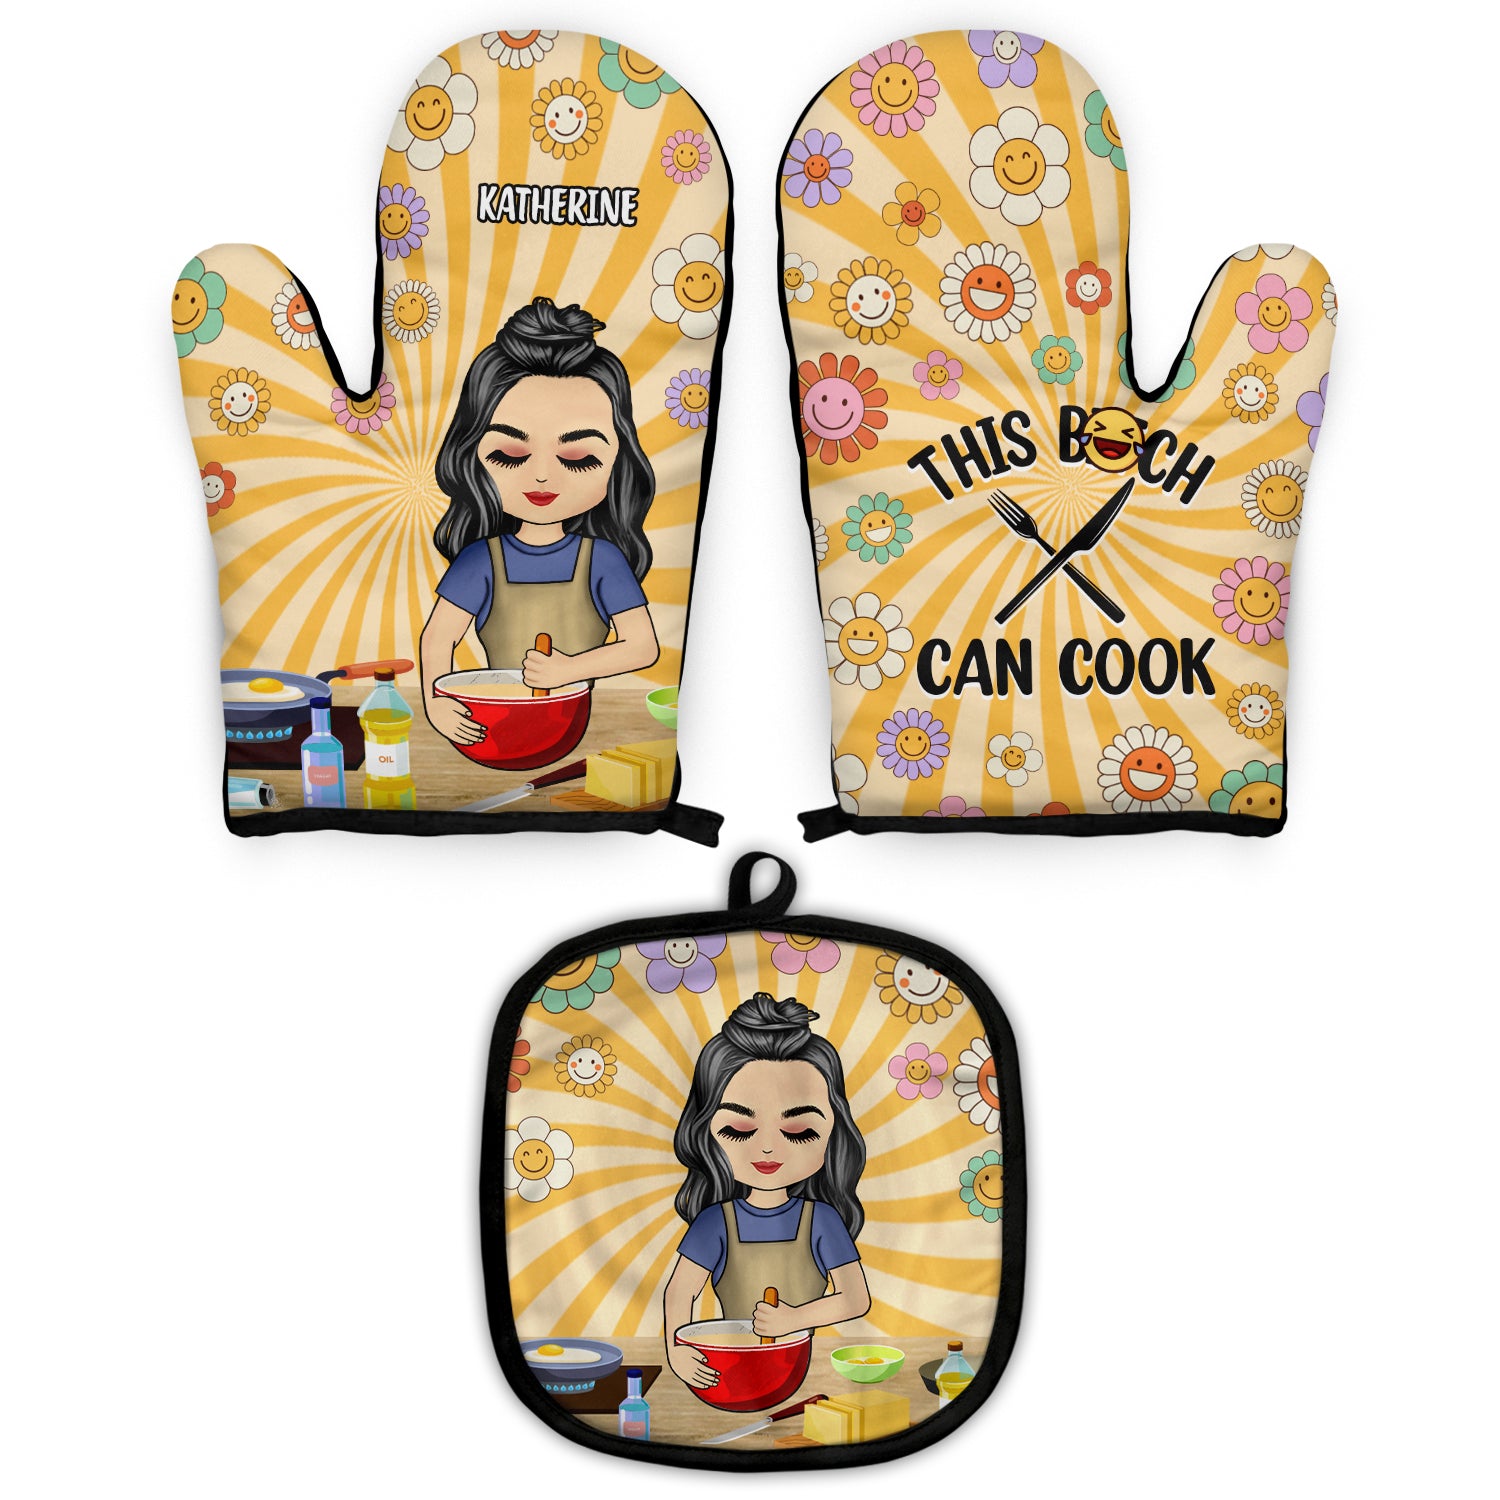 This Can Cook - Gift For Her, Mother - Personalized Oven Mitts, Pot Holders